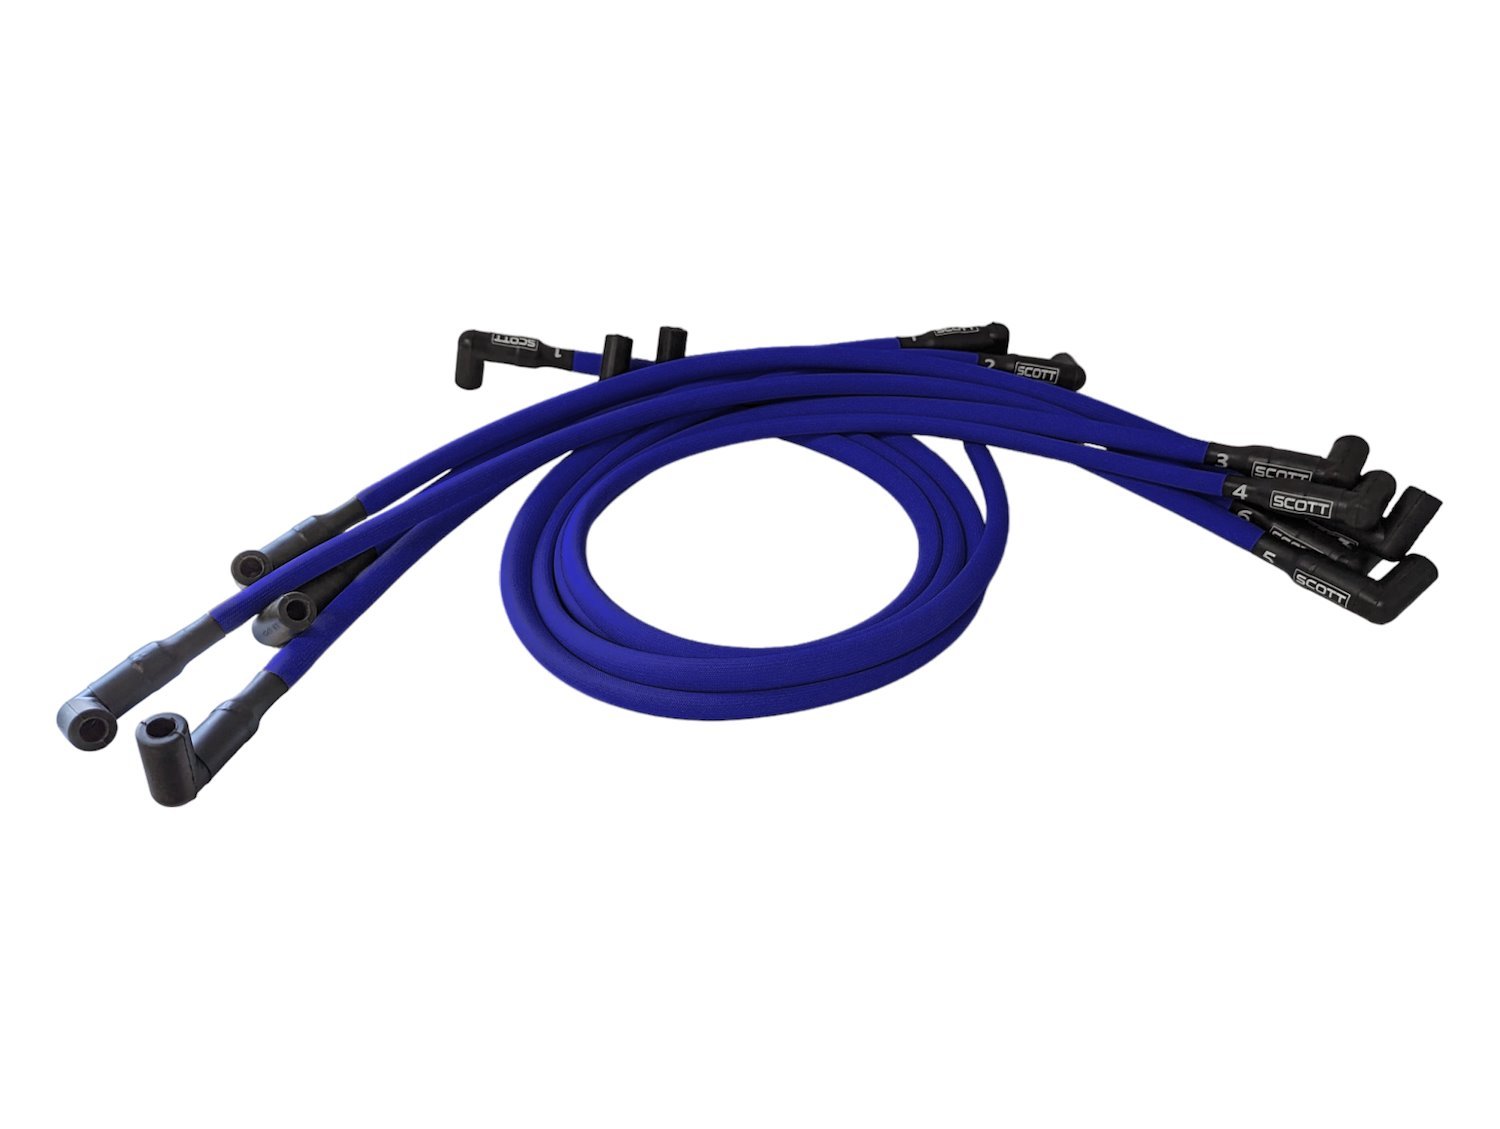 SPW300-PS-402-3 Super Mag Fiberglass-Oversleeved Spark Plug Wire Set for Small Block Chevy, Over Valve Cover [Blue]